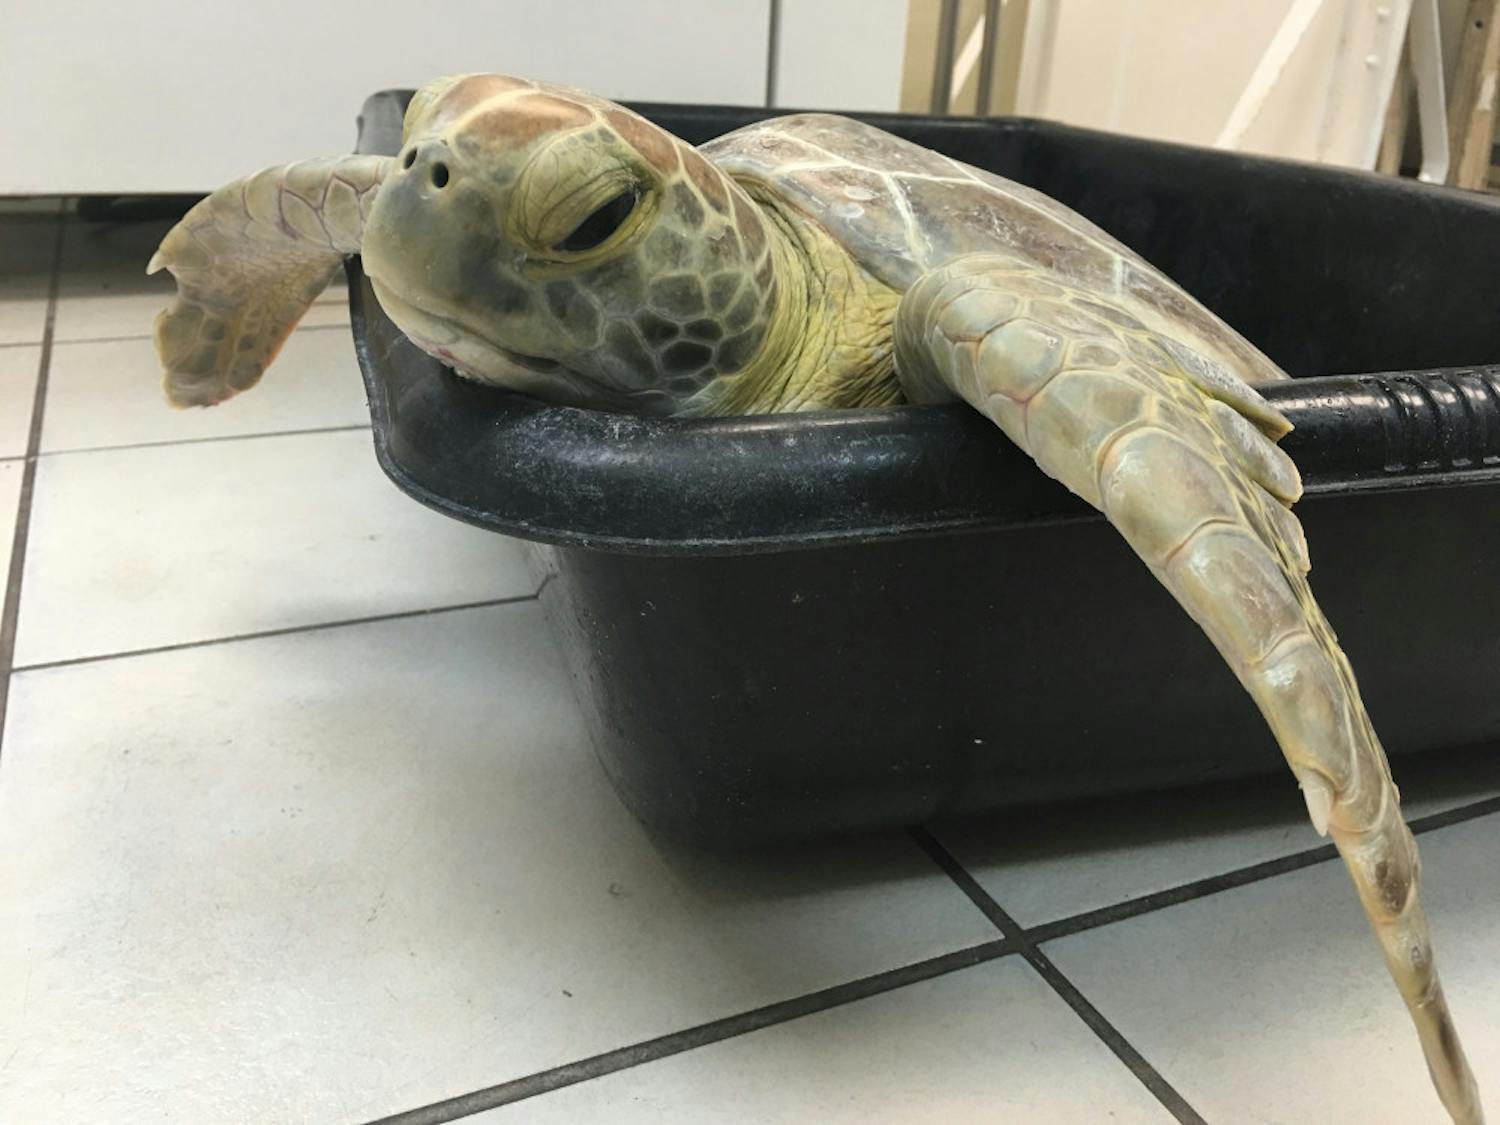 The turtles arrived at the hospital Oct. 20 with multiple external tumors ranging from the size of a pencil eraser to a baseball around their fins and necks.